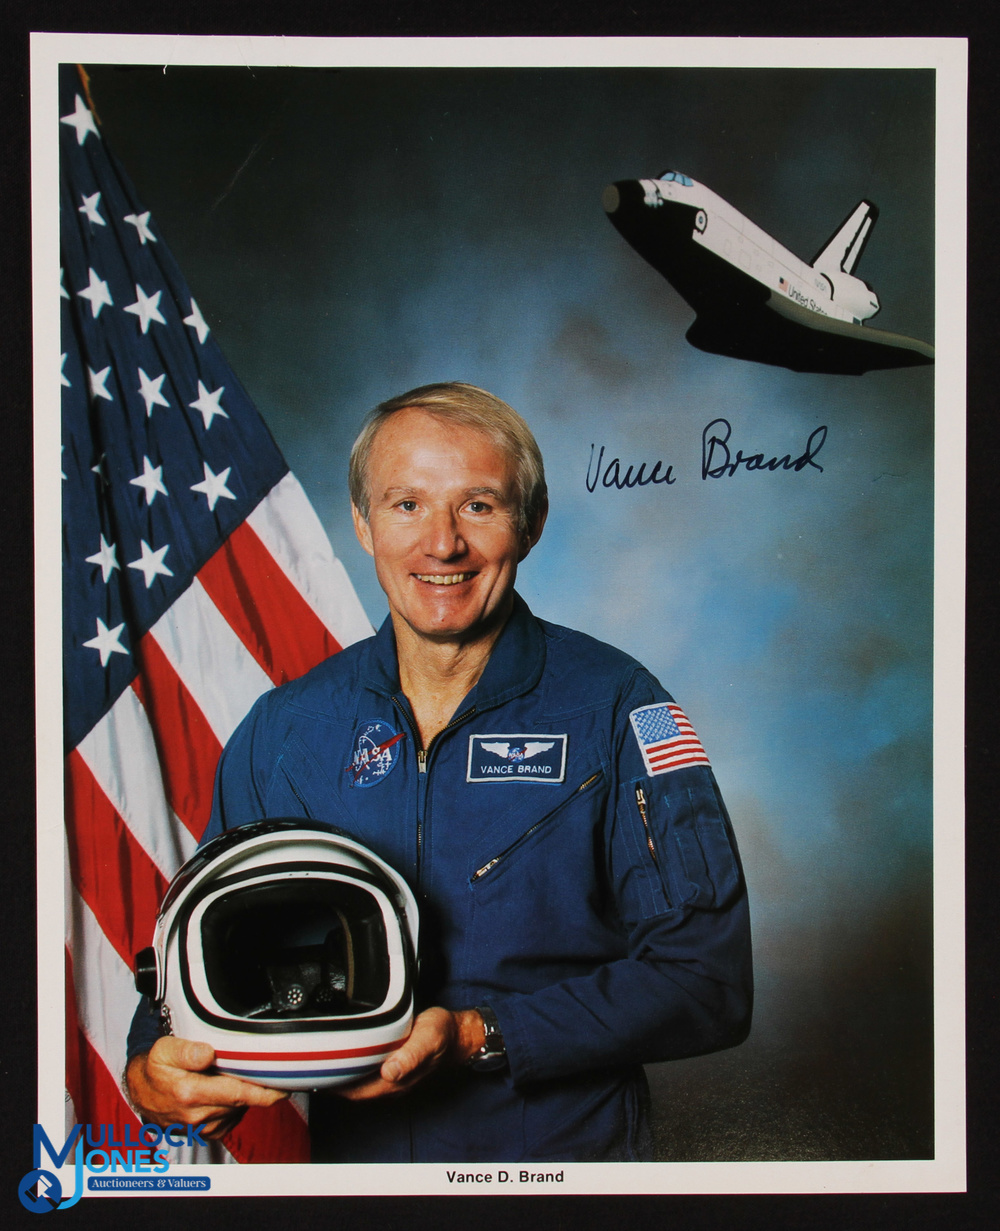 NASA - Vance Brand - Space Shuttle colour 10x8 showing him standing signed across the image, plus